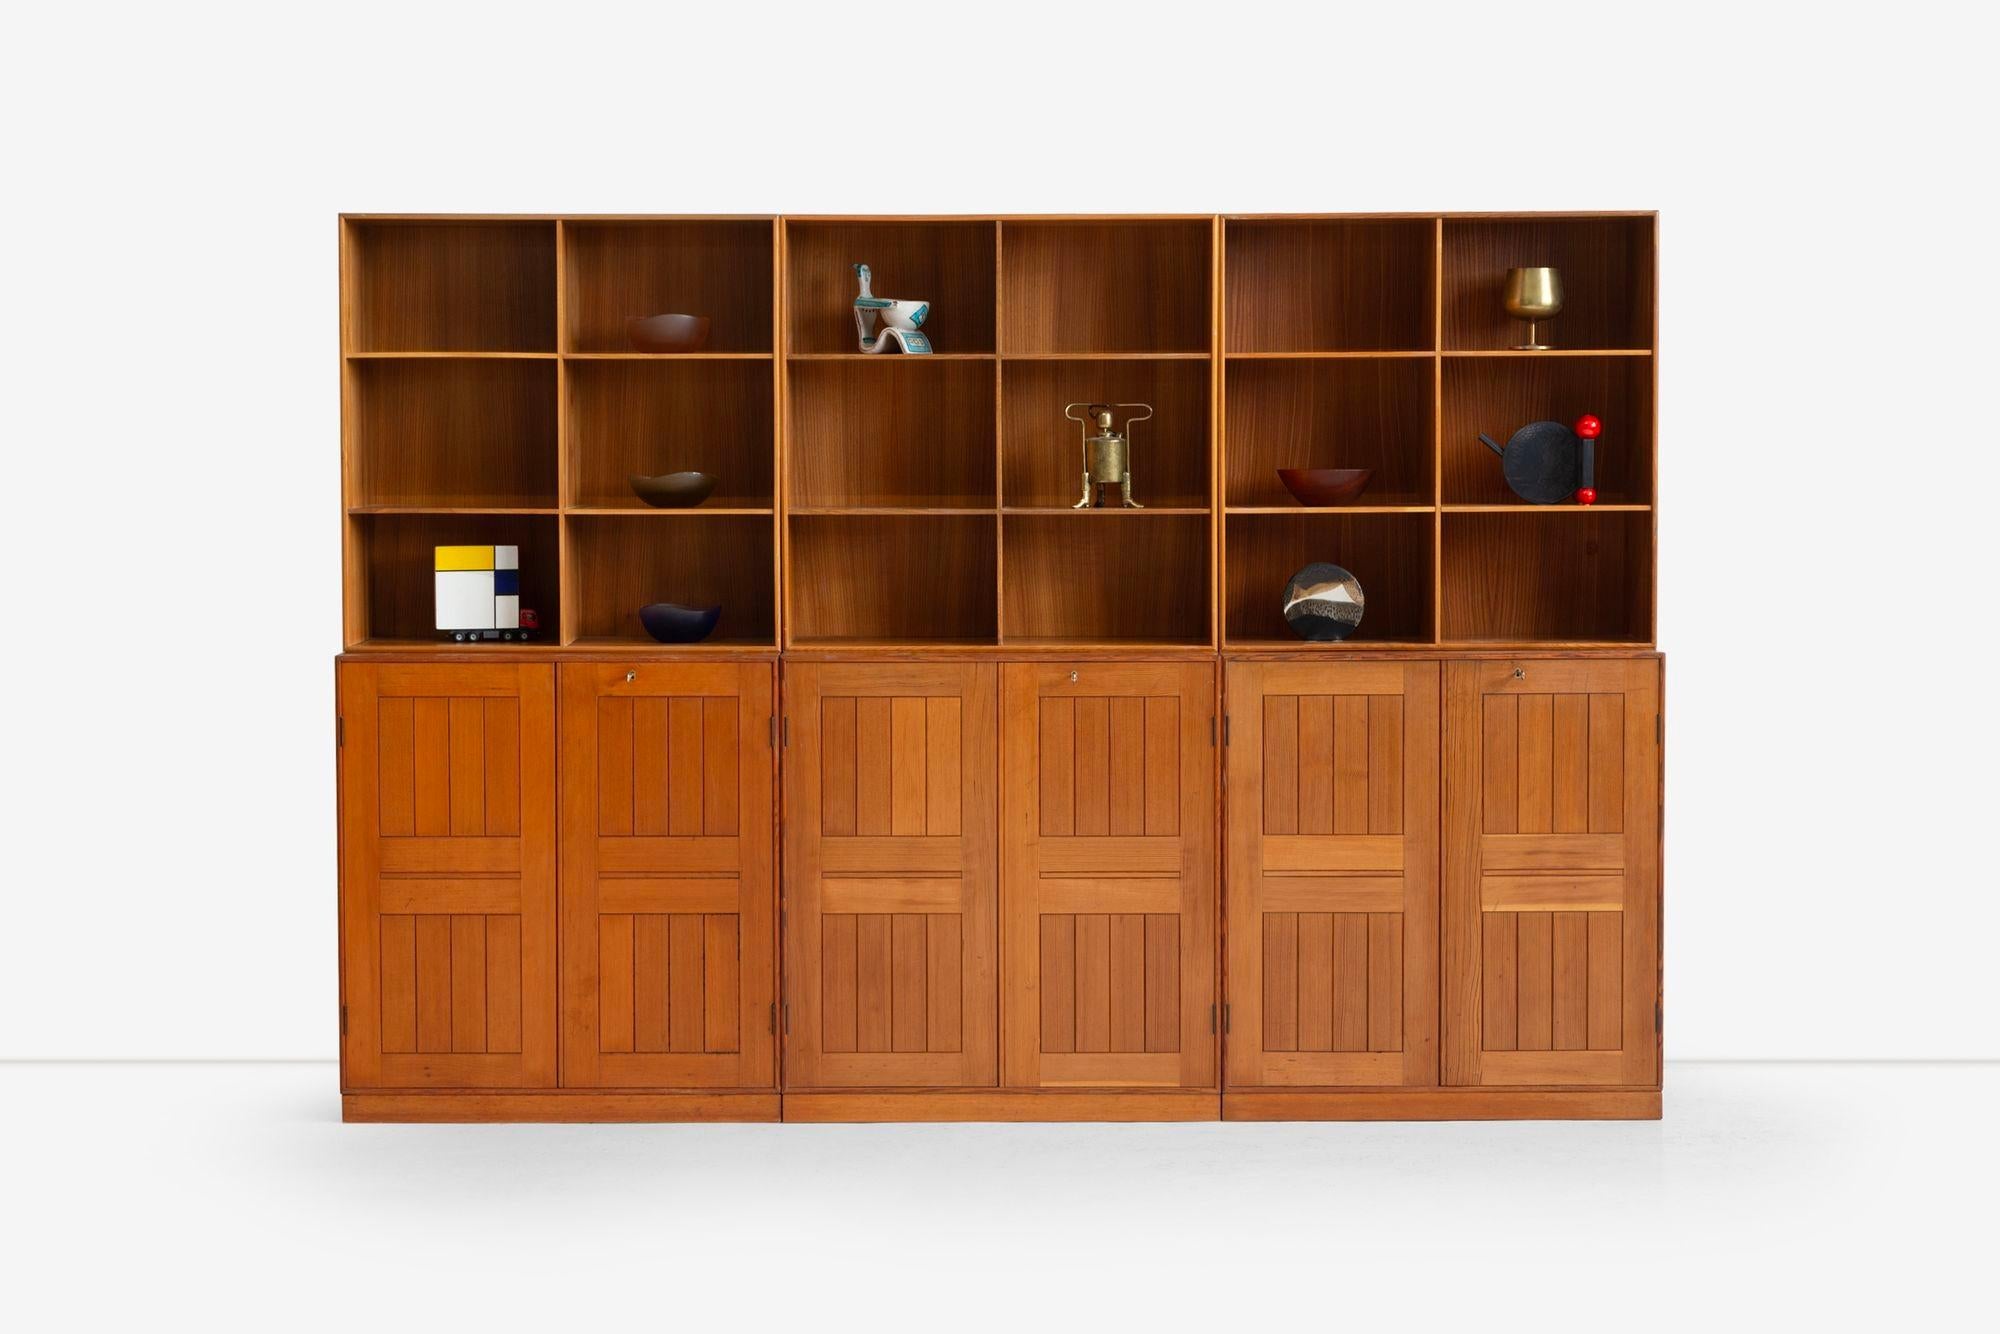 Mogens Koch Cabinets set of Six for Rud Rasmussens Snedkerier, Denmark, 1960.This set consists of three bookcases, each uniquely designed. One cabinet features two doors concealing four small drawers and two larger drawers over four open storage